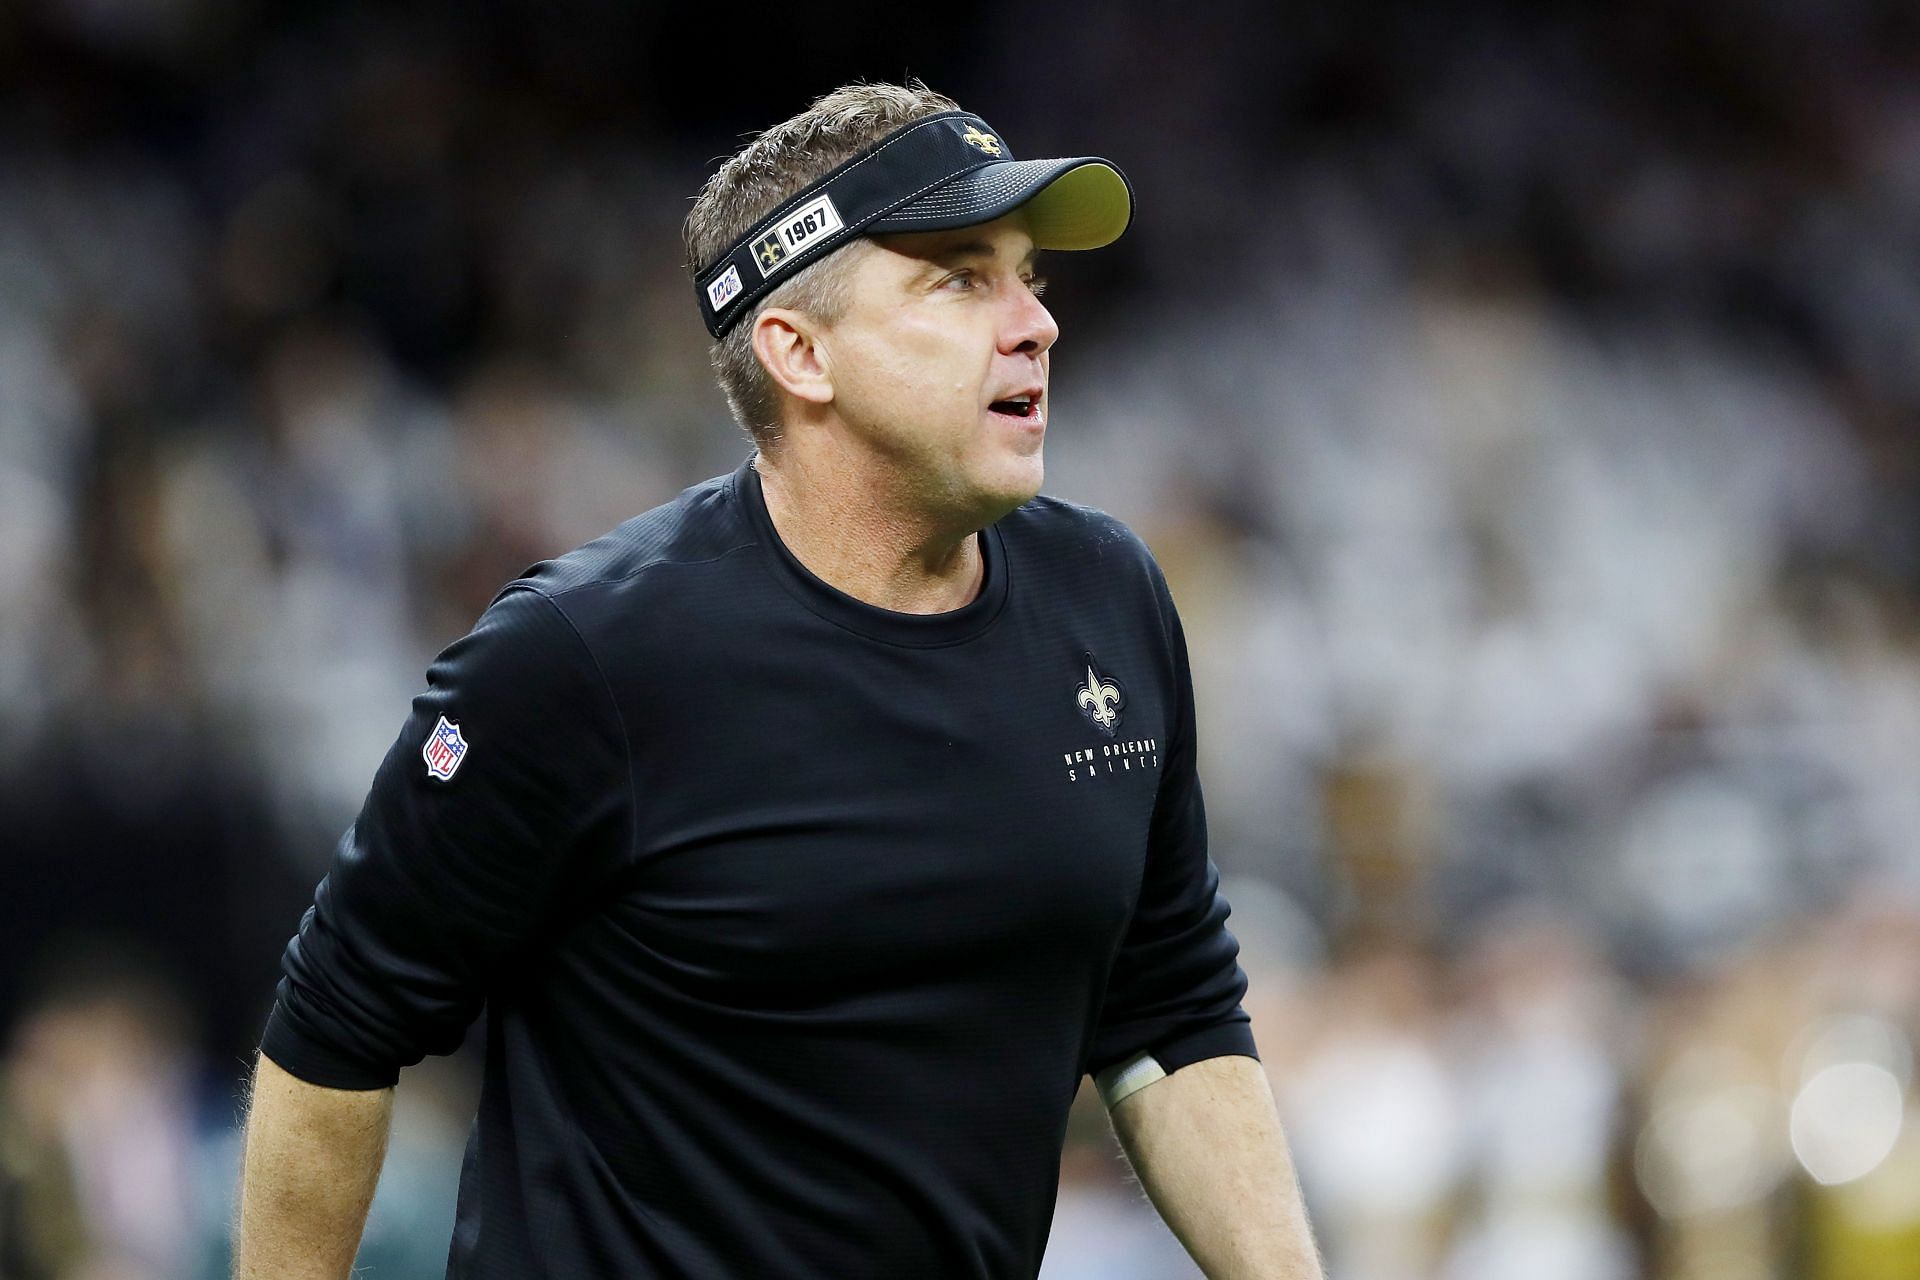 Sean Payton has been involved in scandals as a Saint